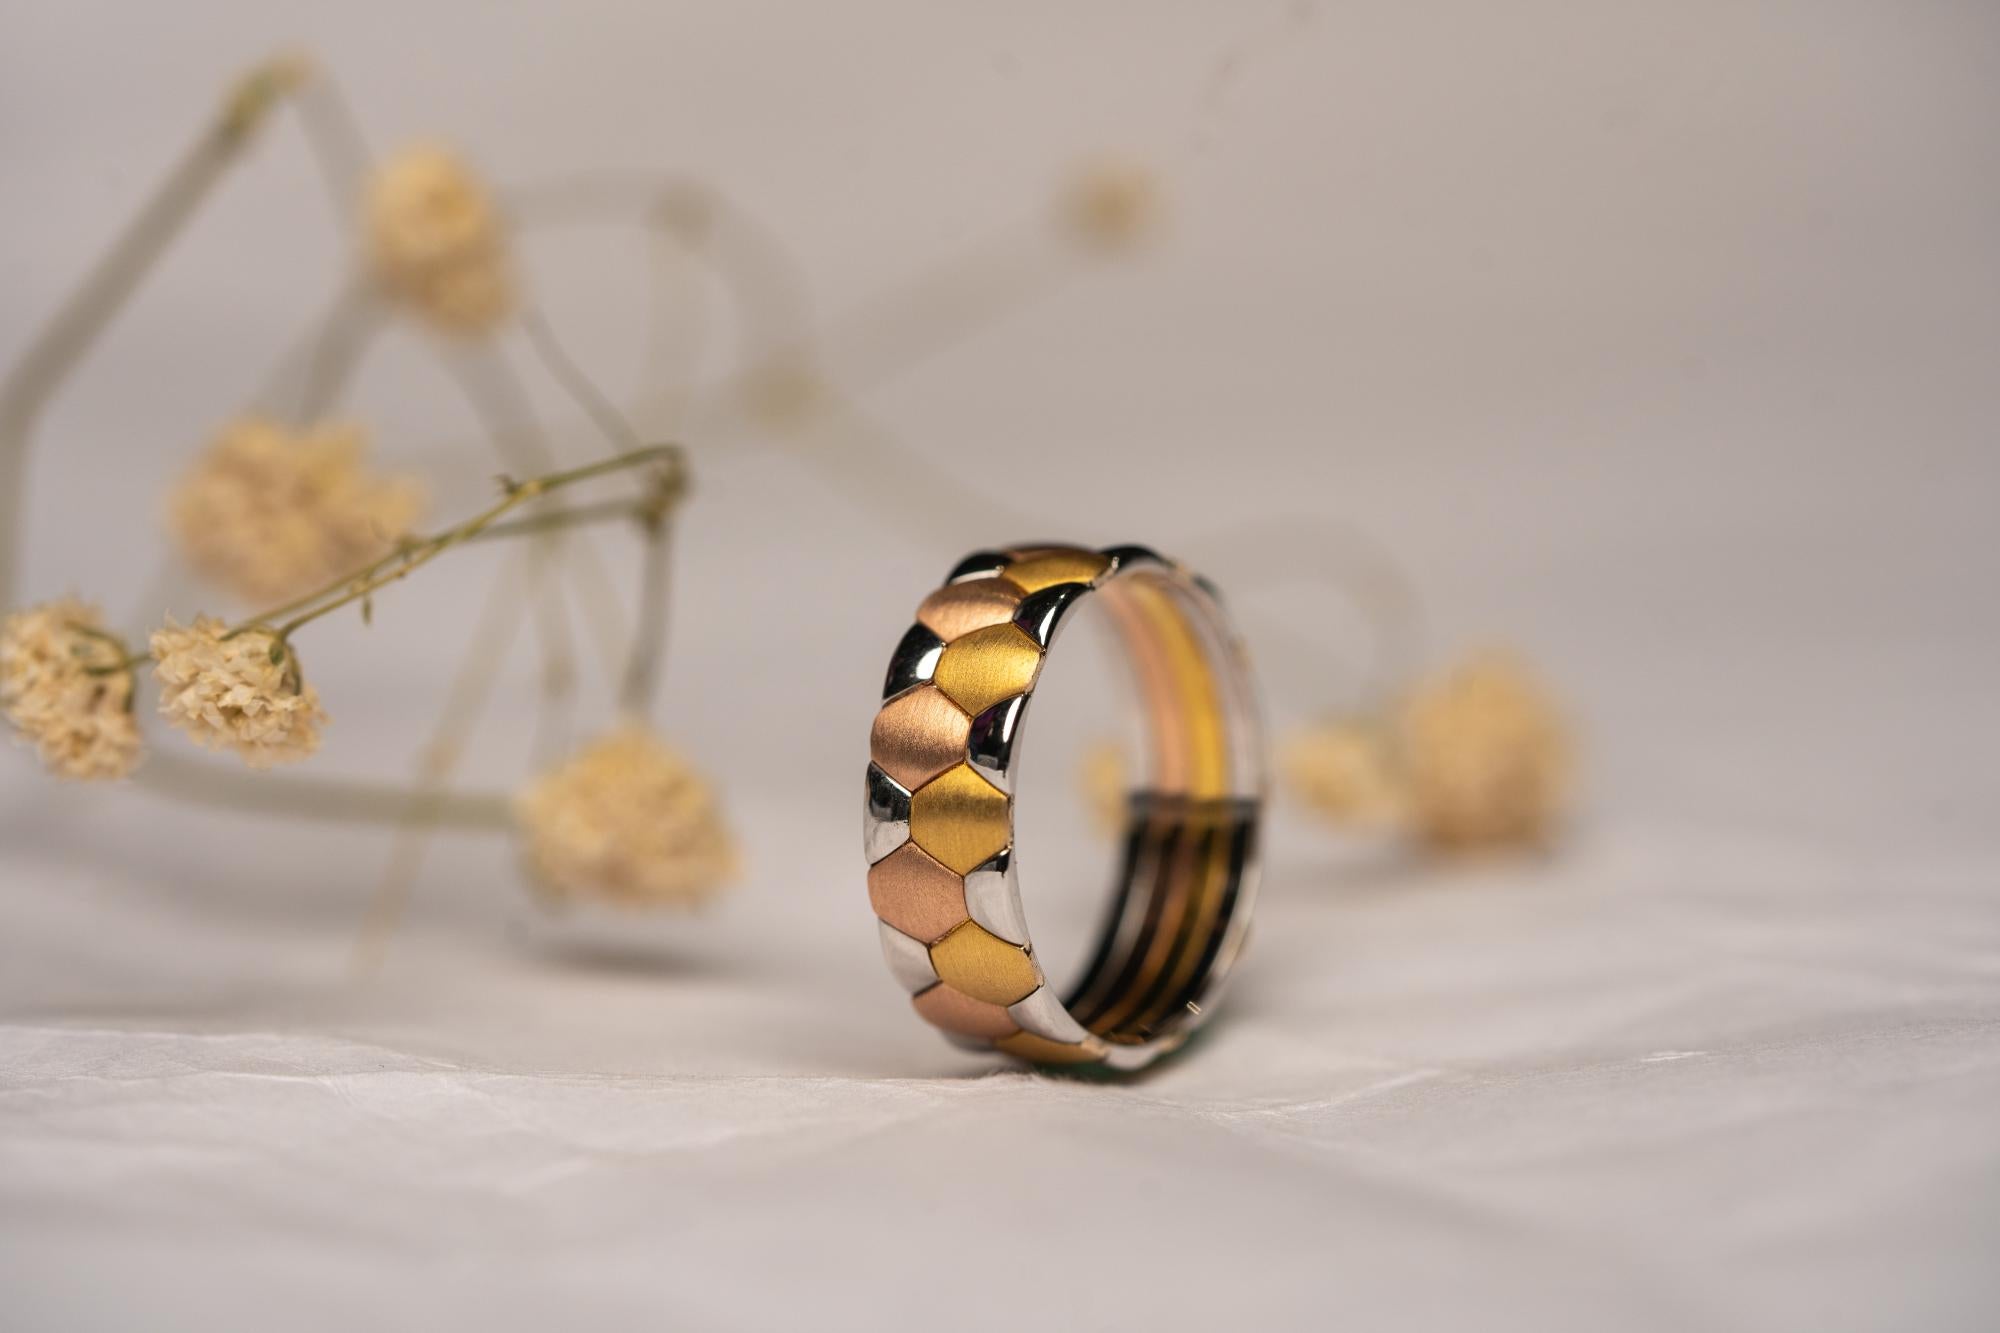 15% Off Sale 14K Tri Color Rolling Band Rings